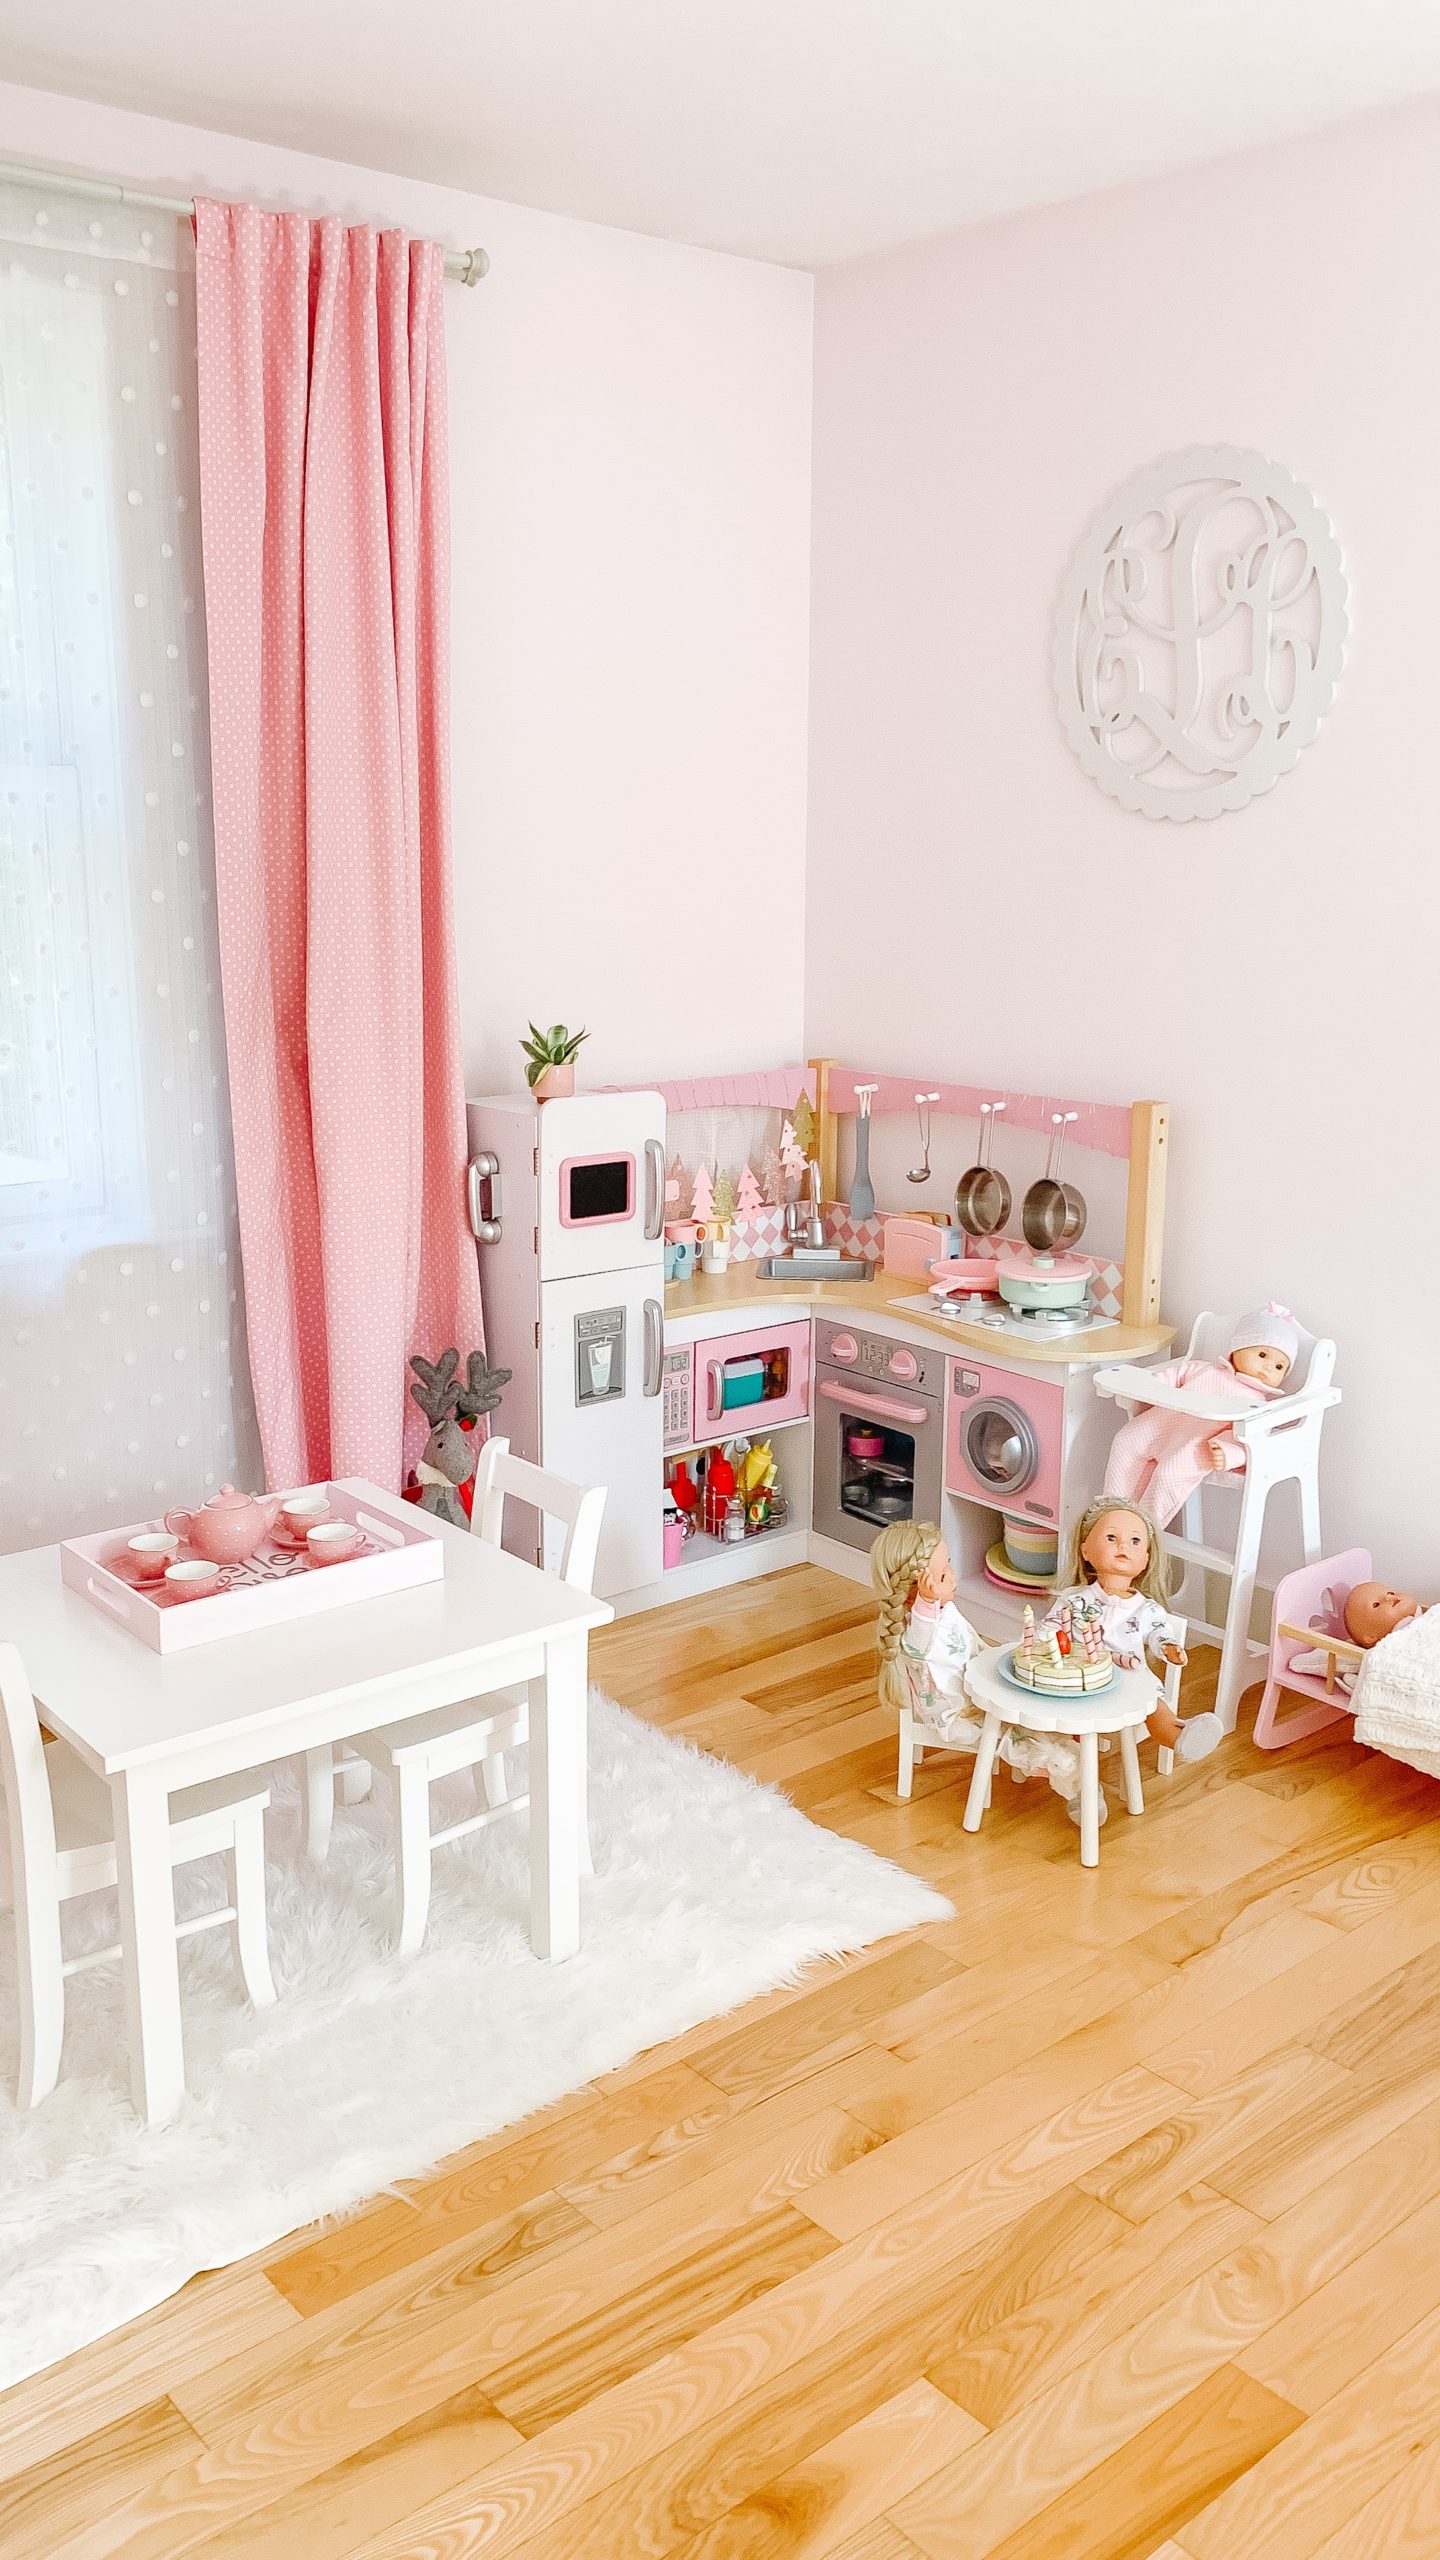 All Things Elle’s Pink Bedroom & Holiday Decor – Cape Cod Momma